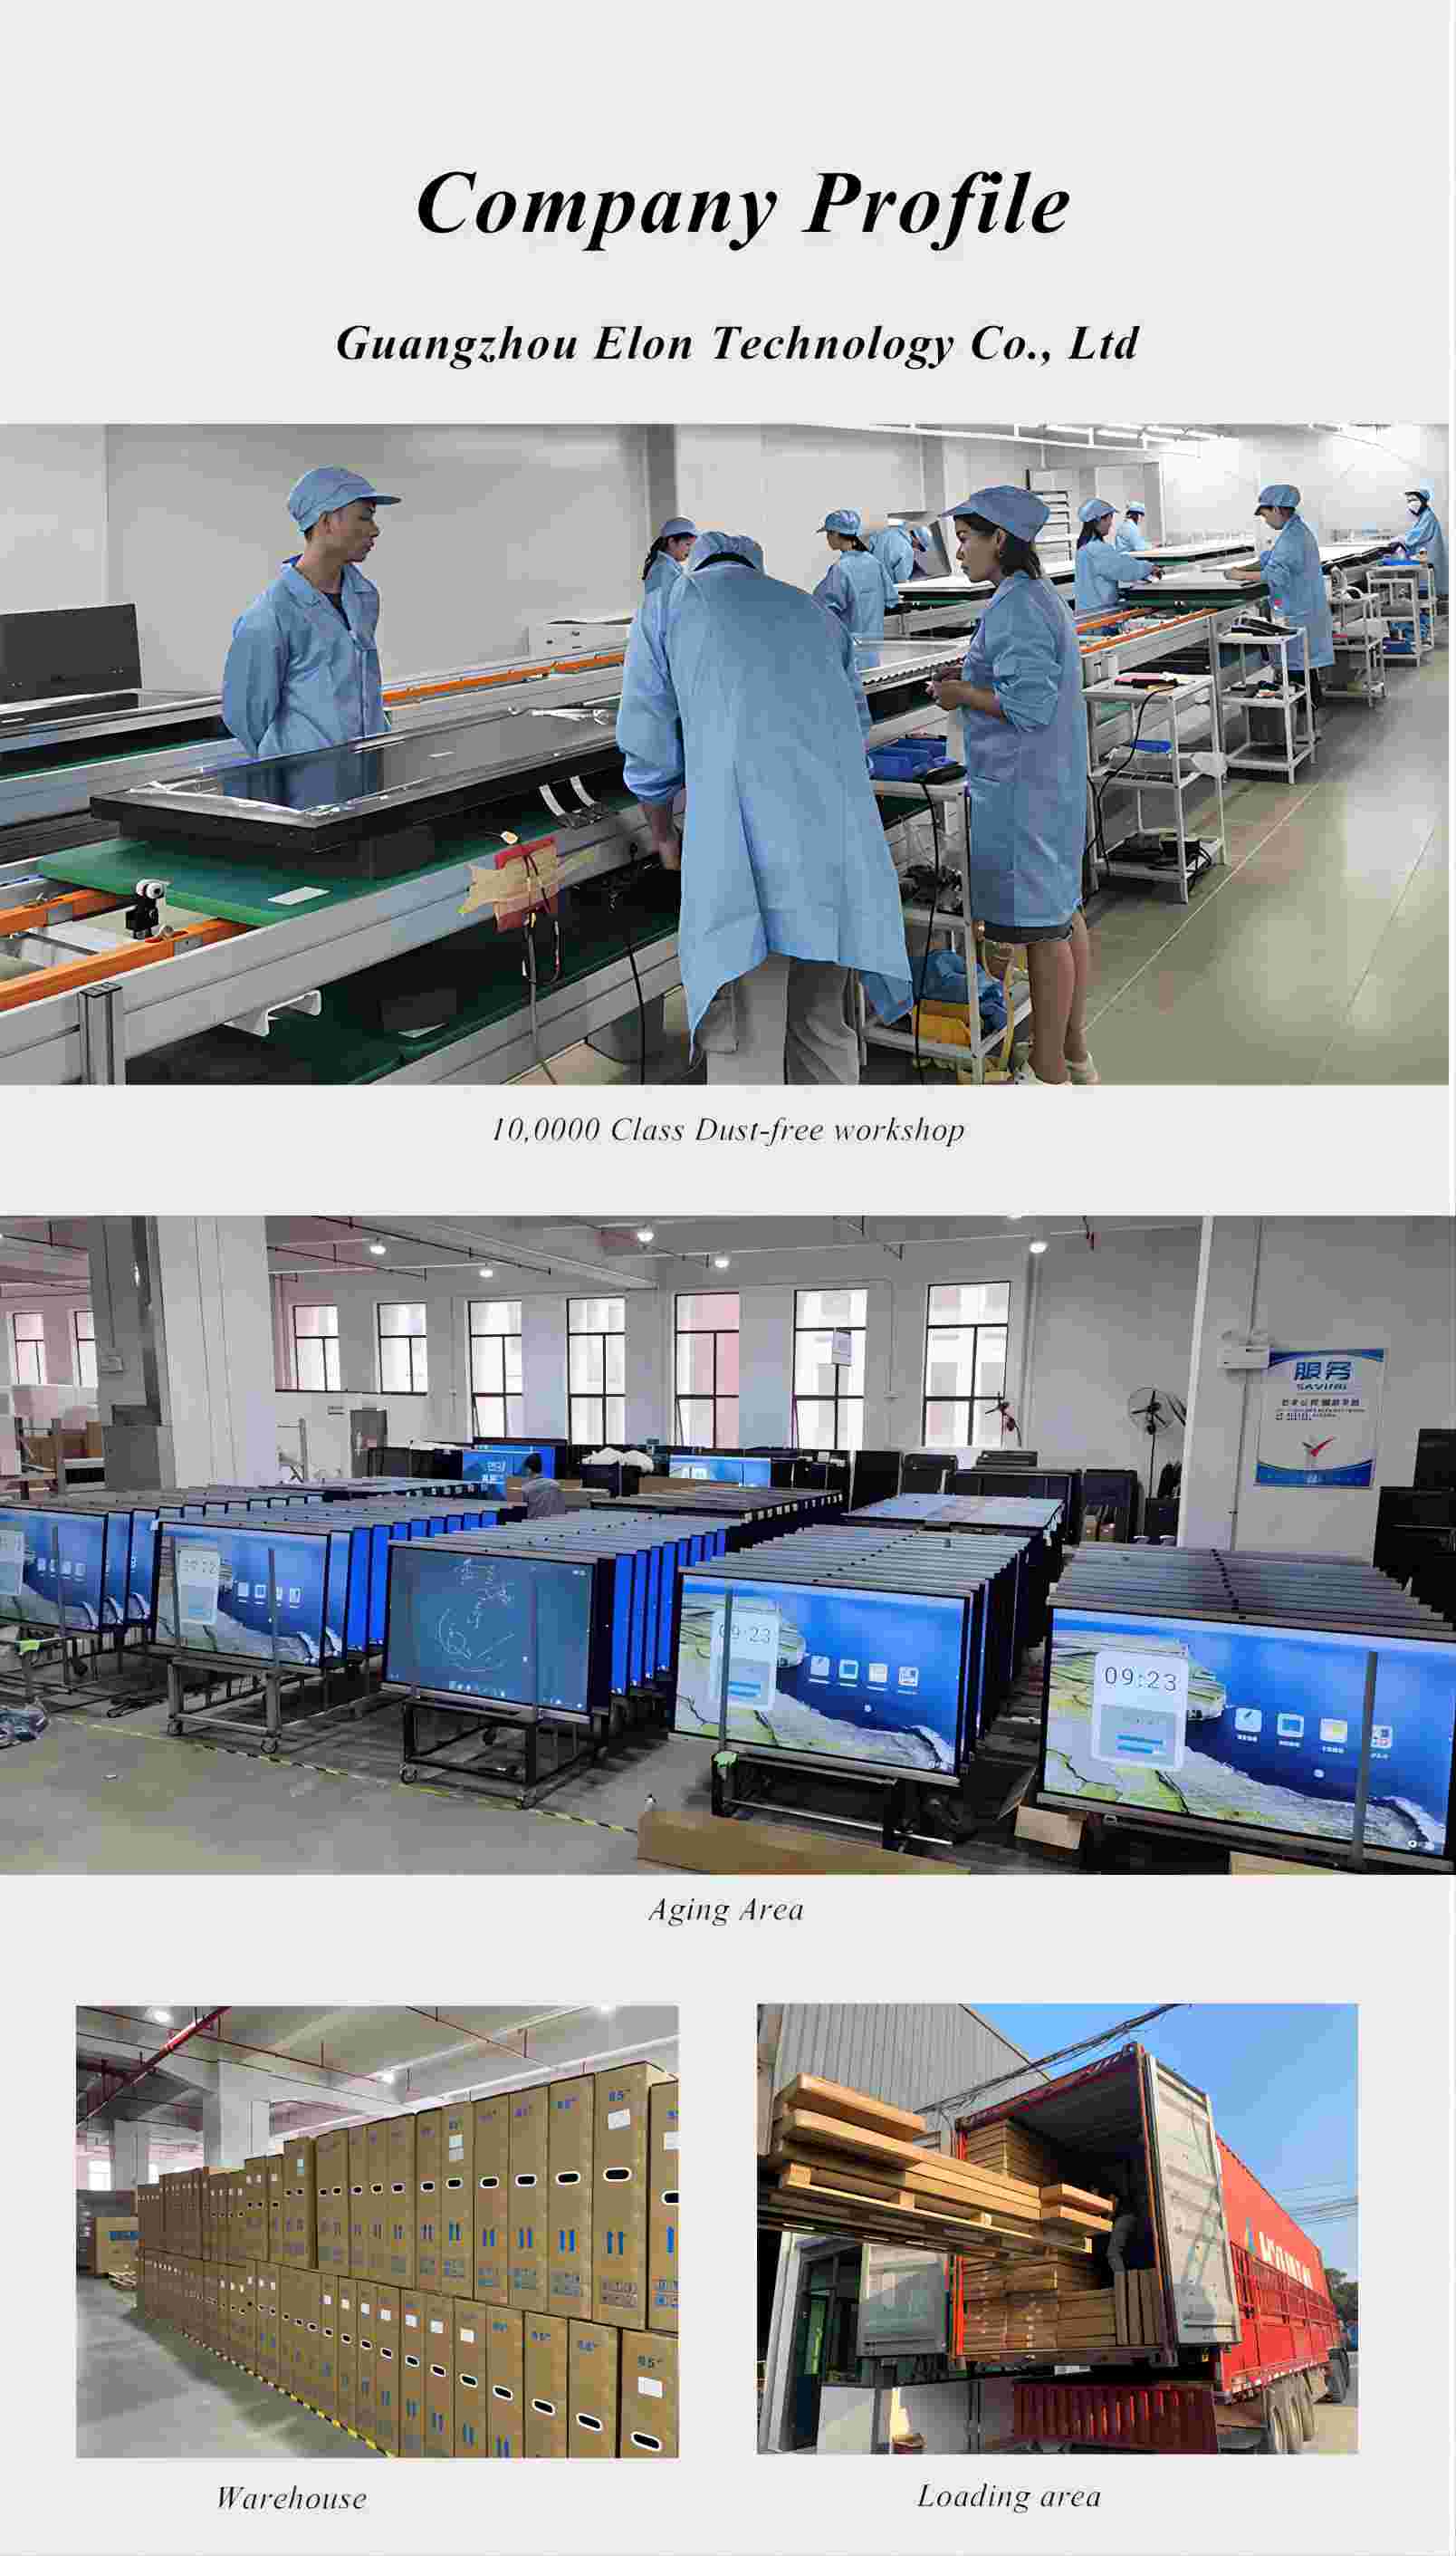 lcd panels for video wall